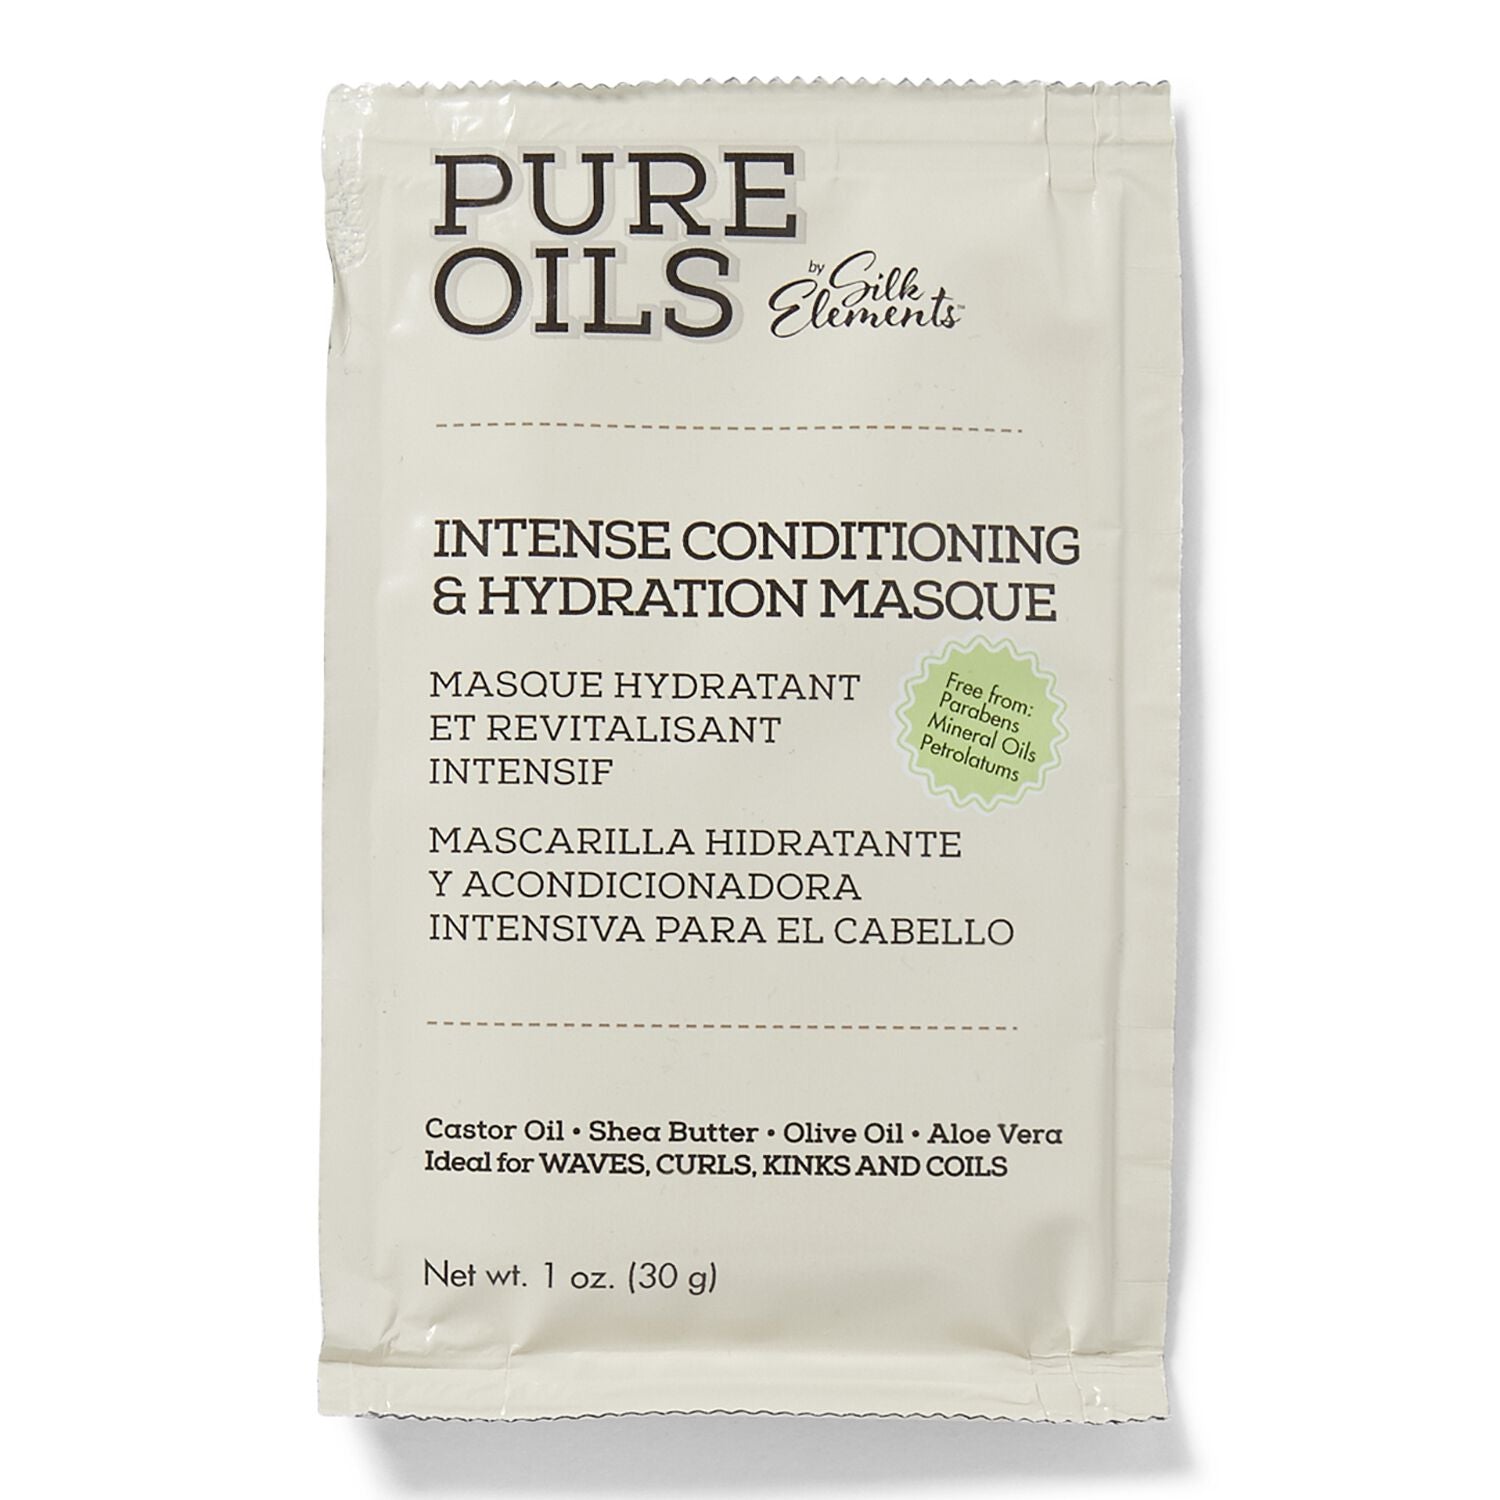 Pure Oils  by   Silk Elements Intense Conditioning & Hydration Masque